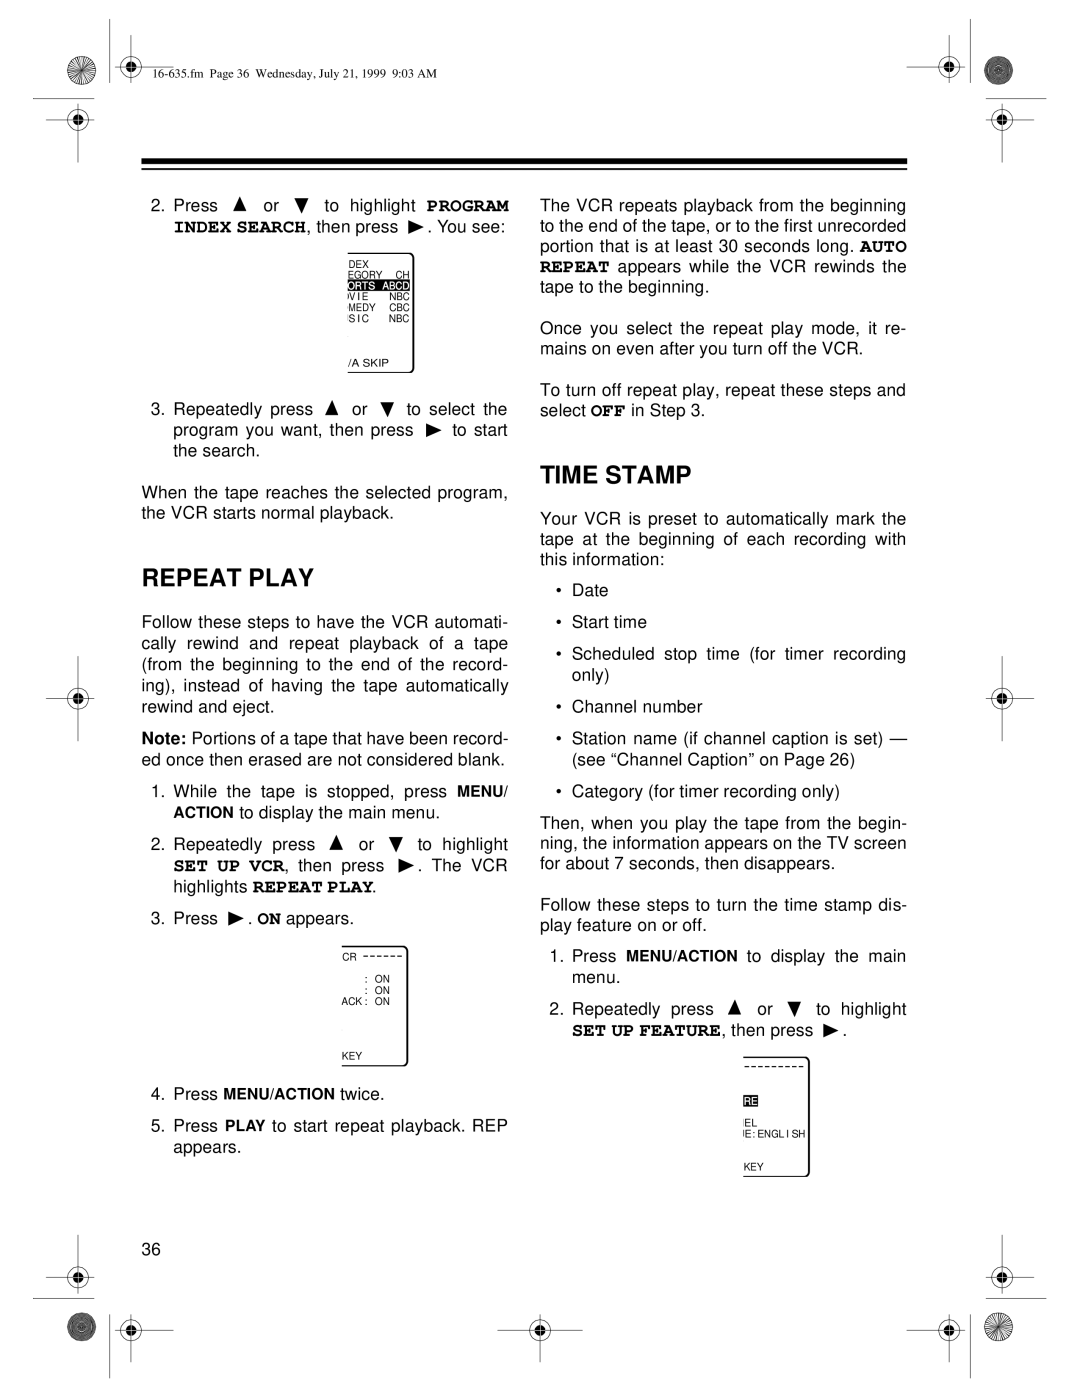 Radio Shack 66 owner manual Repeat Play, Time Stamp, fm Page 36 Wednesday, July 21, 1999 903 AM 